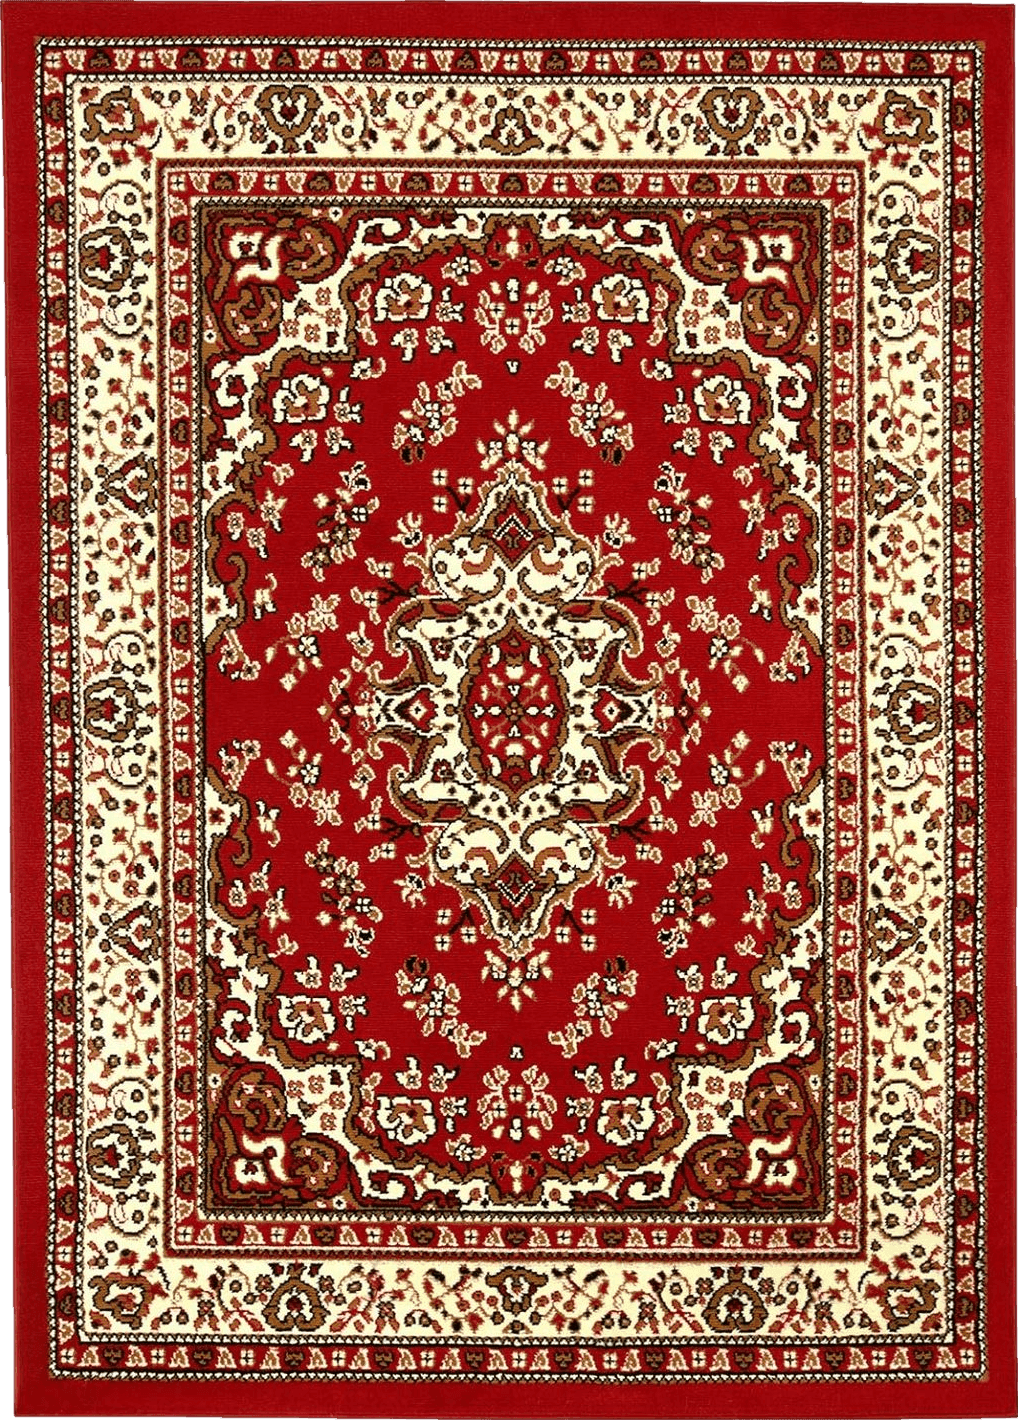 Oriental Antep Rugs Kashan King Collection HIMALAYAS Oriental Area Rug Maroon and Beige - Maroon and Beige - 8' x 10'